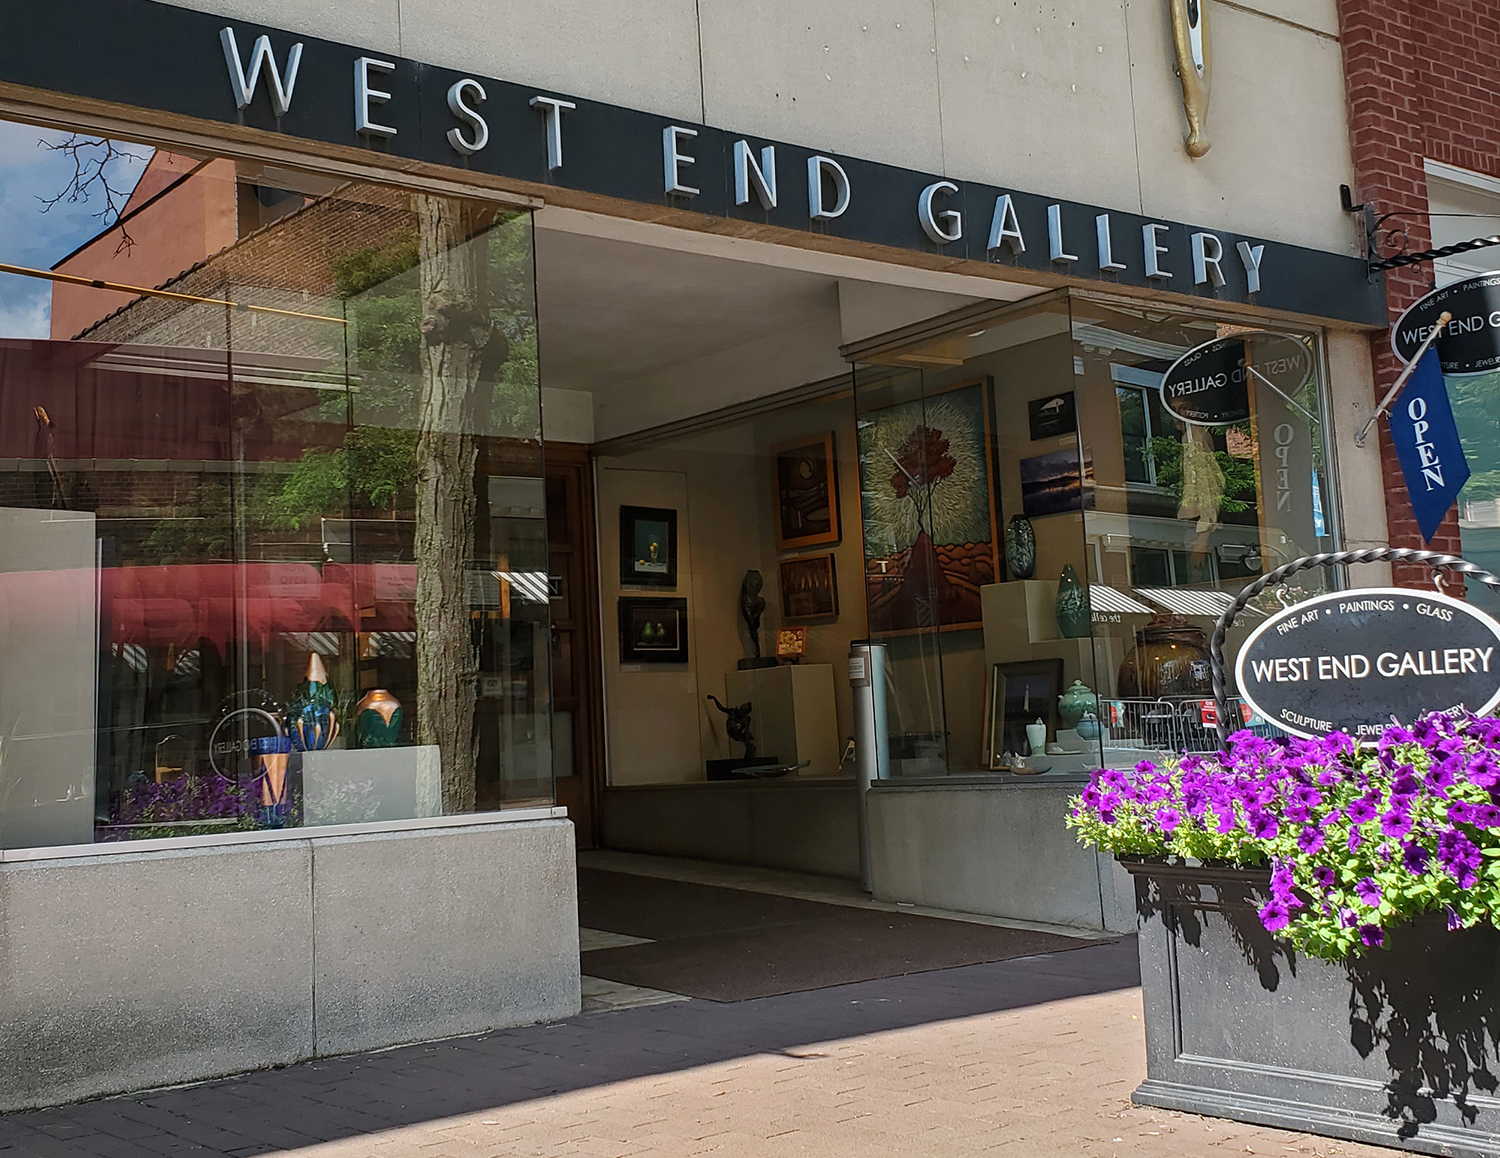 West End Gallery Facade - 12 West Market Street Corning, NY